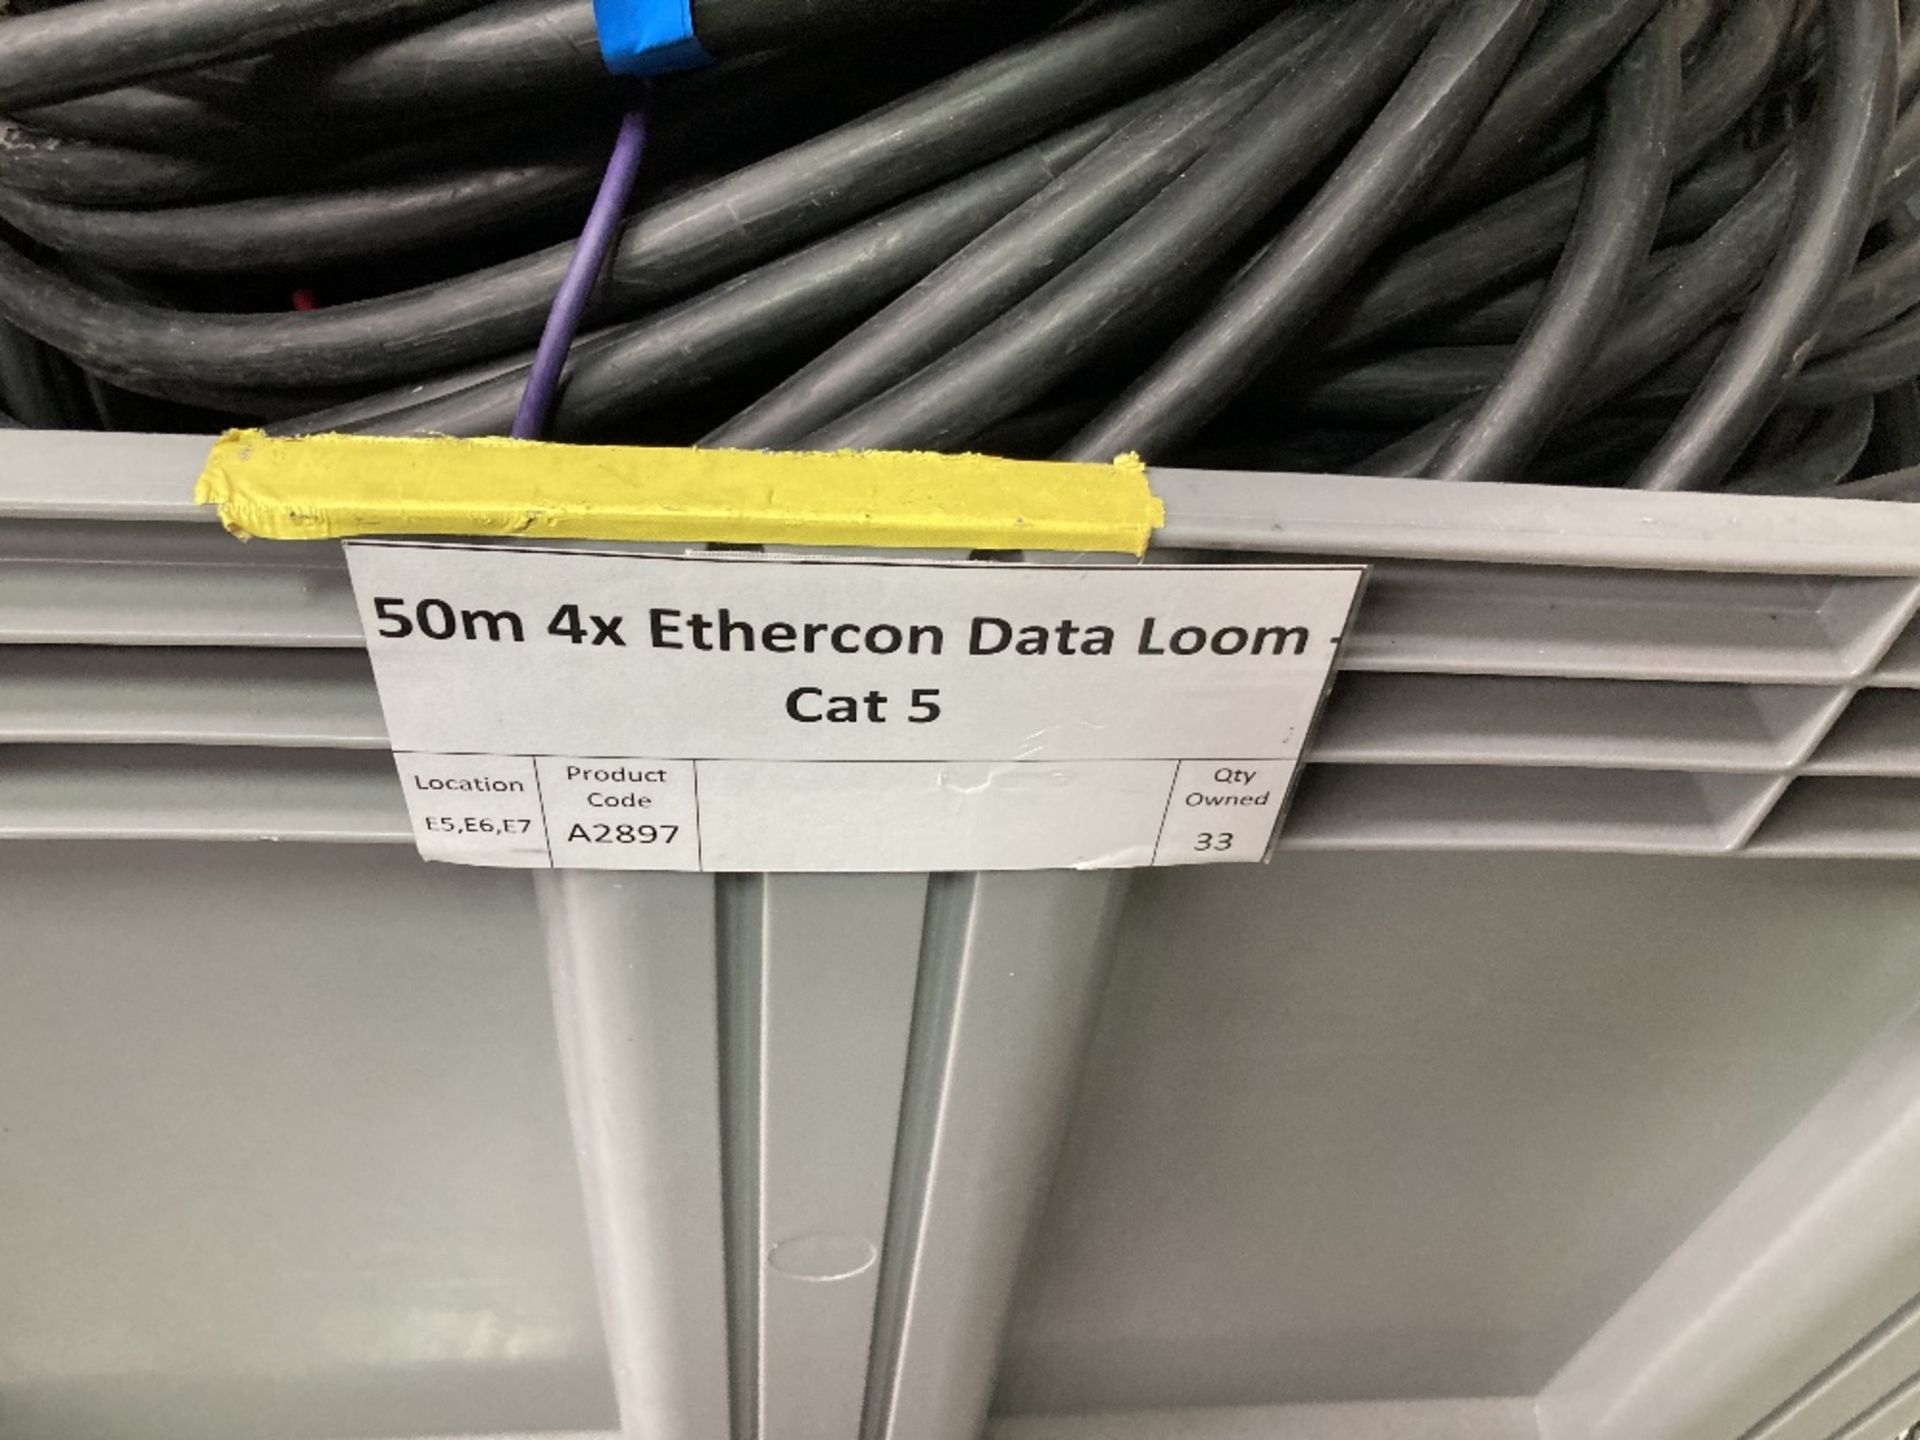 Quantity 80m Ethercon Data Loom CAT 5 Cables With Plastic Container - Image 3 of 3